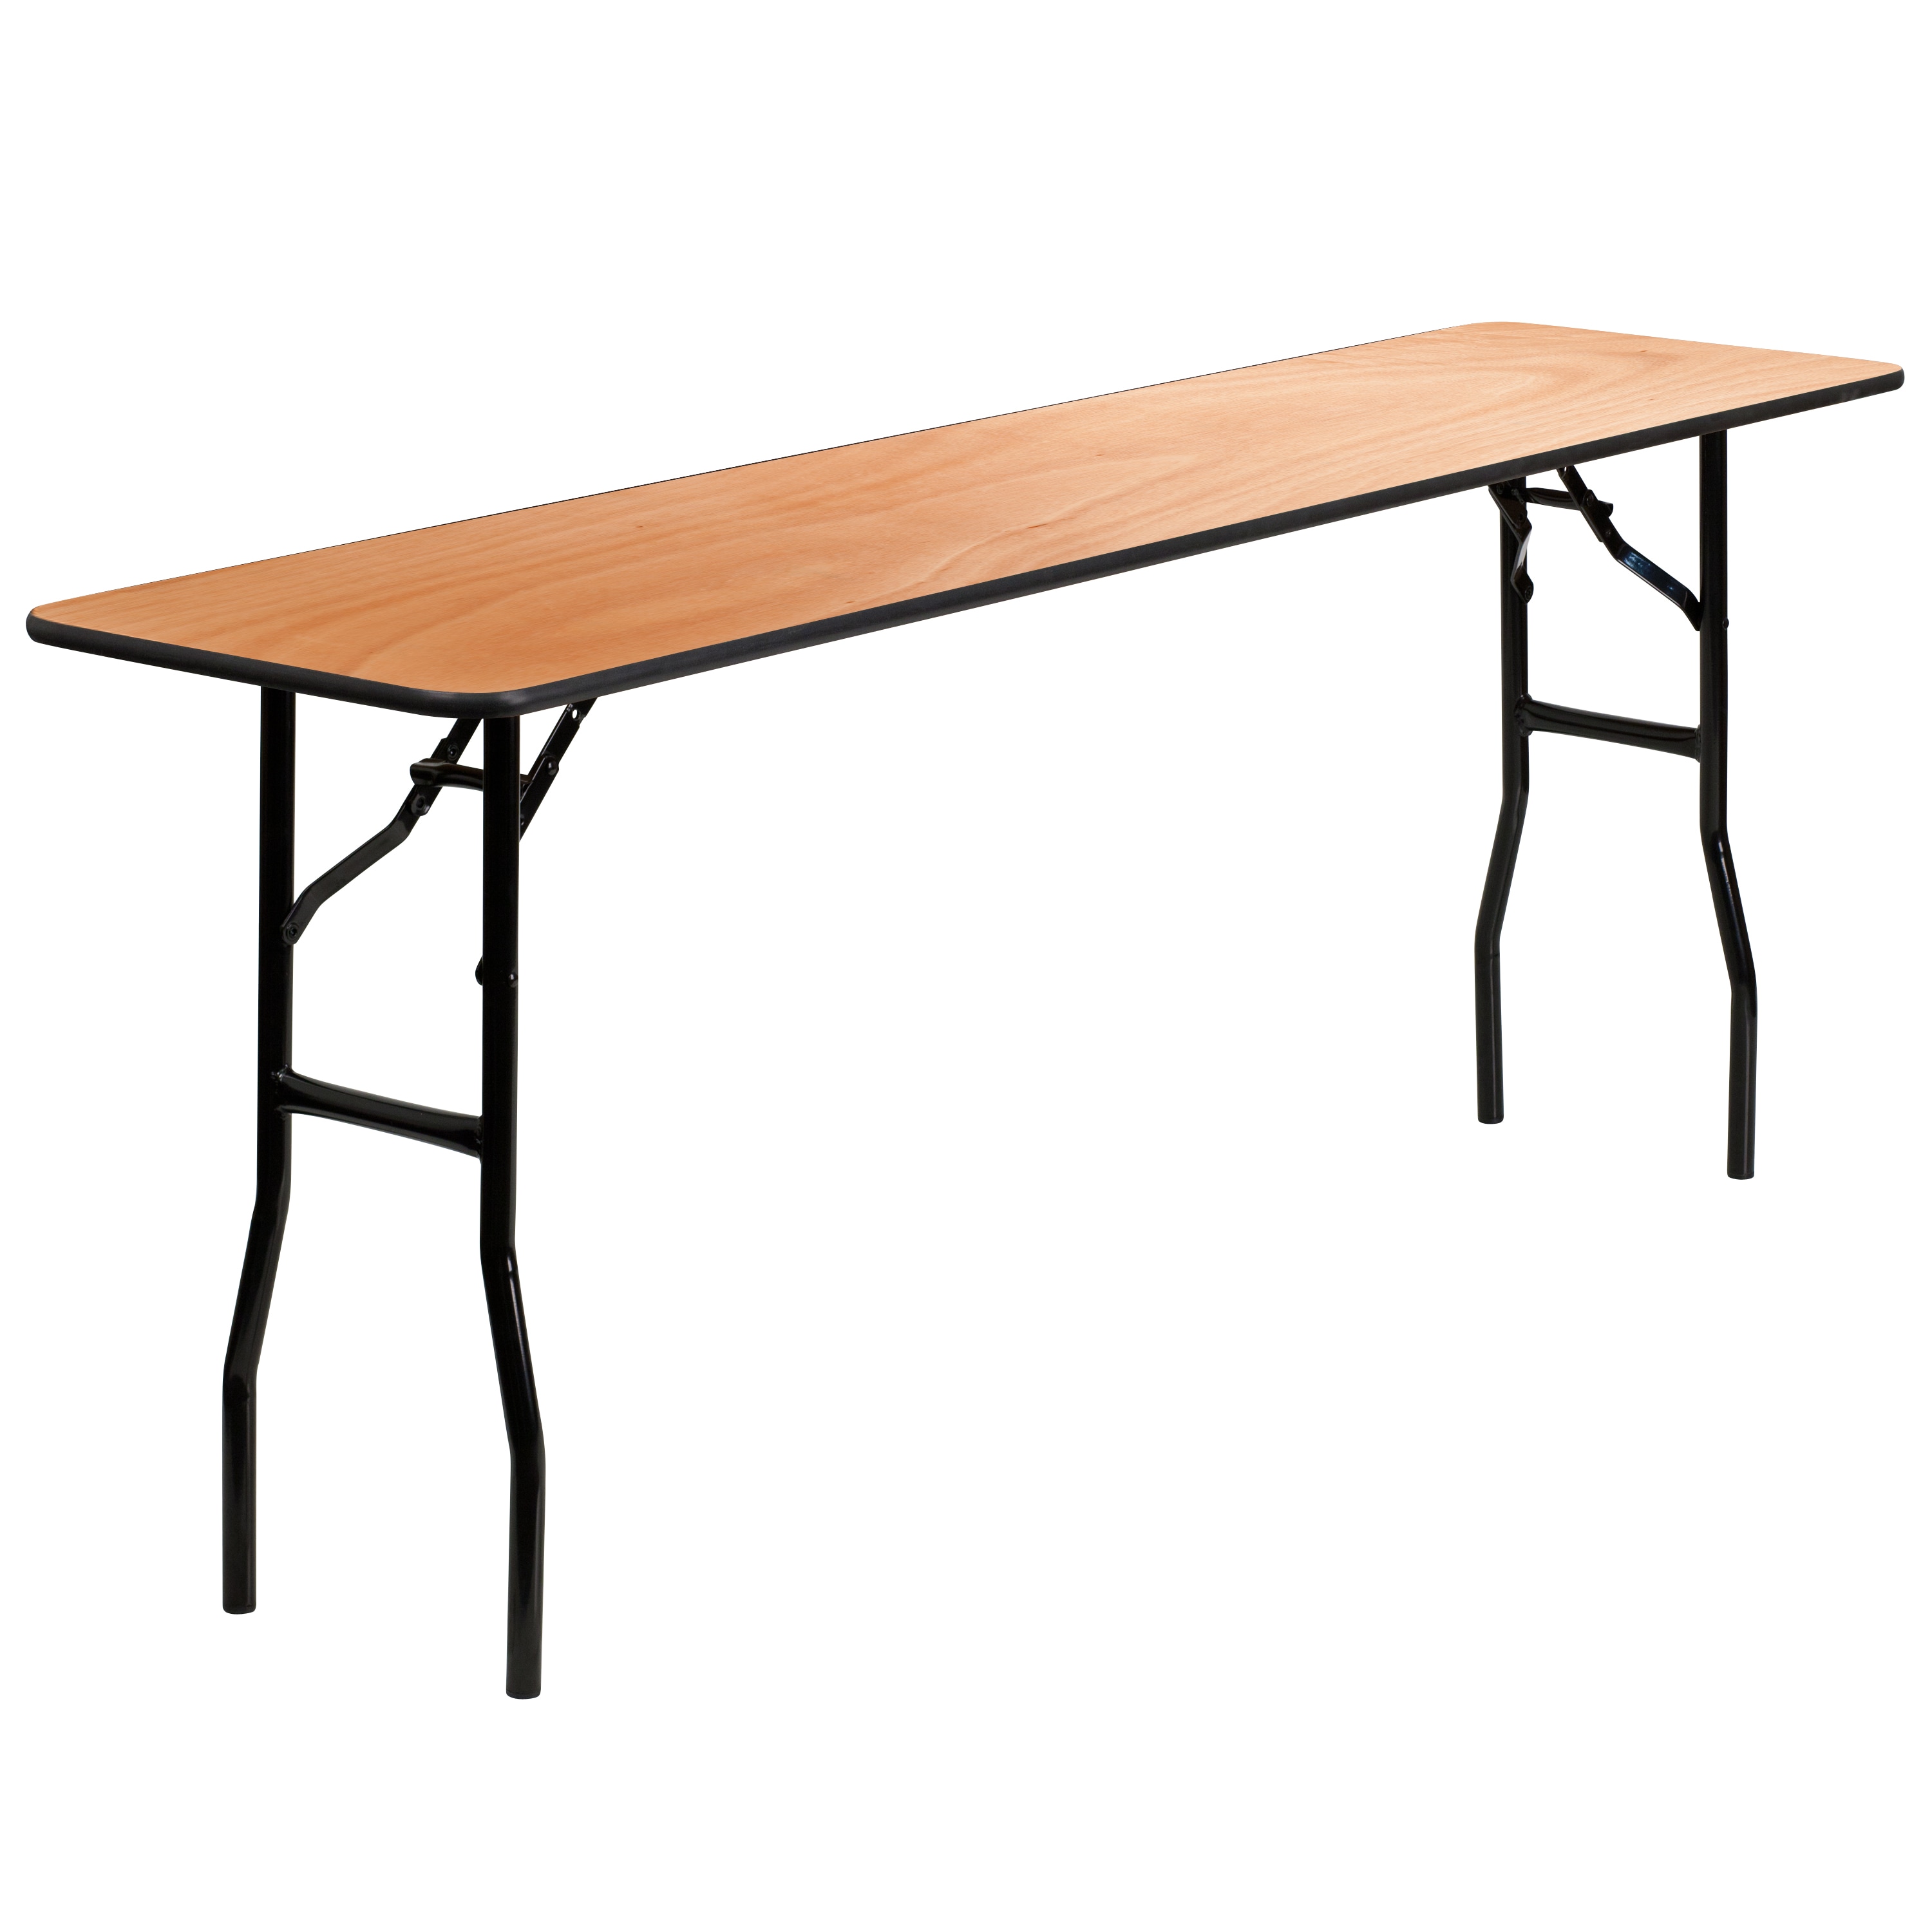 35'' x 21'' Foldable Solid + Manufactured Wood Sewing Table with